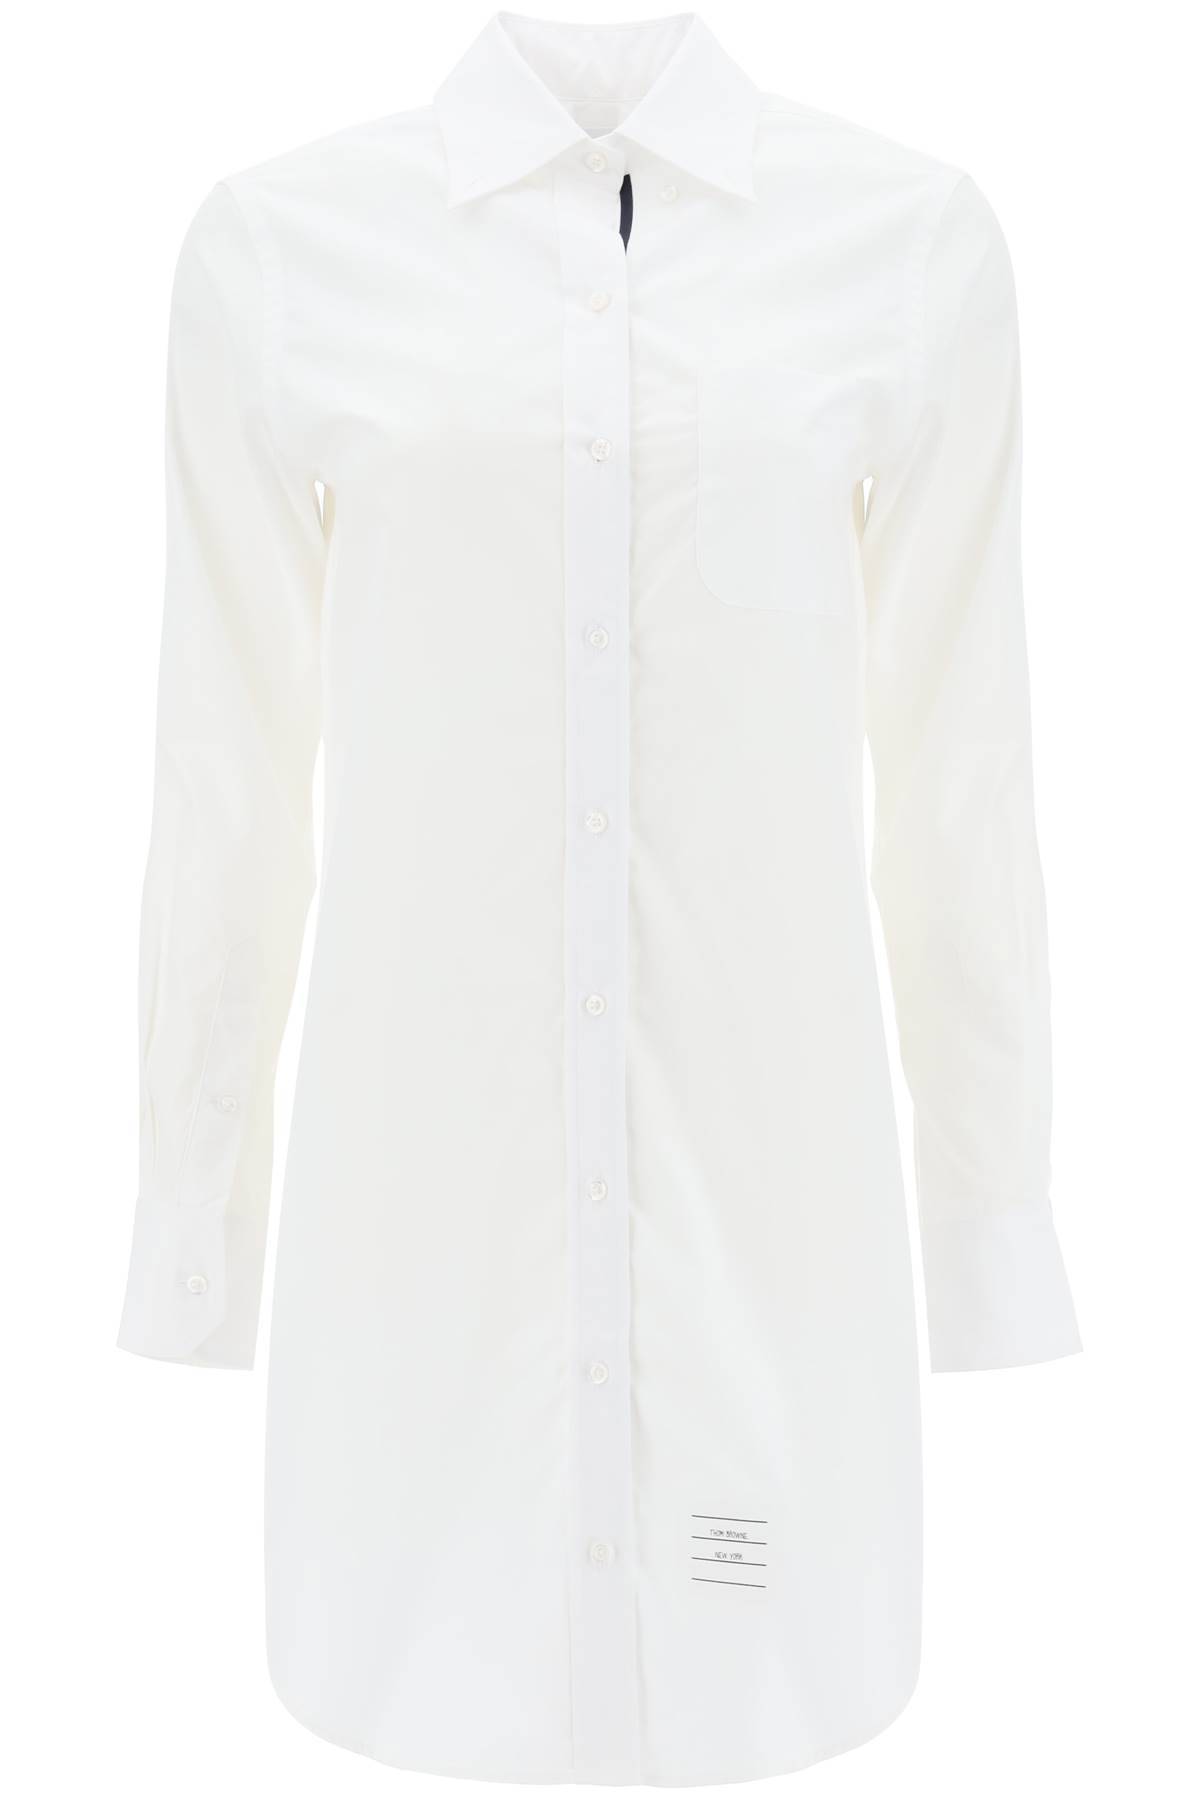 Thom Browne THOM BROWNE short button-down blouse